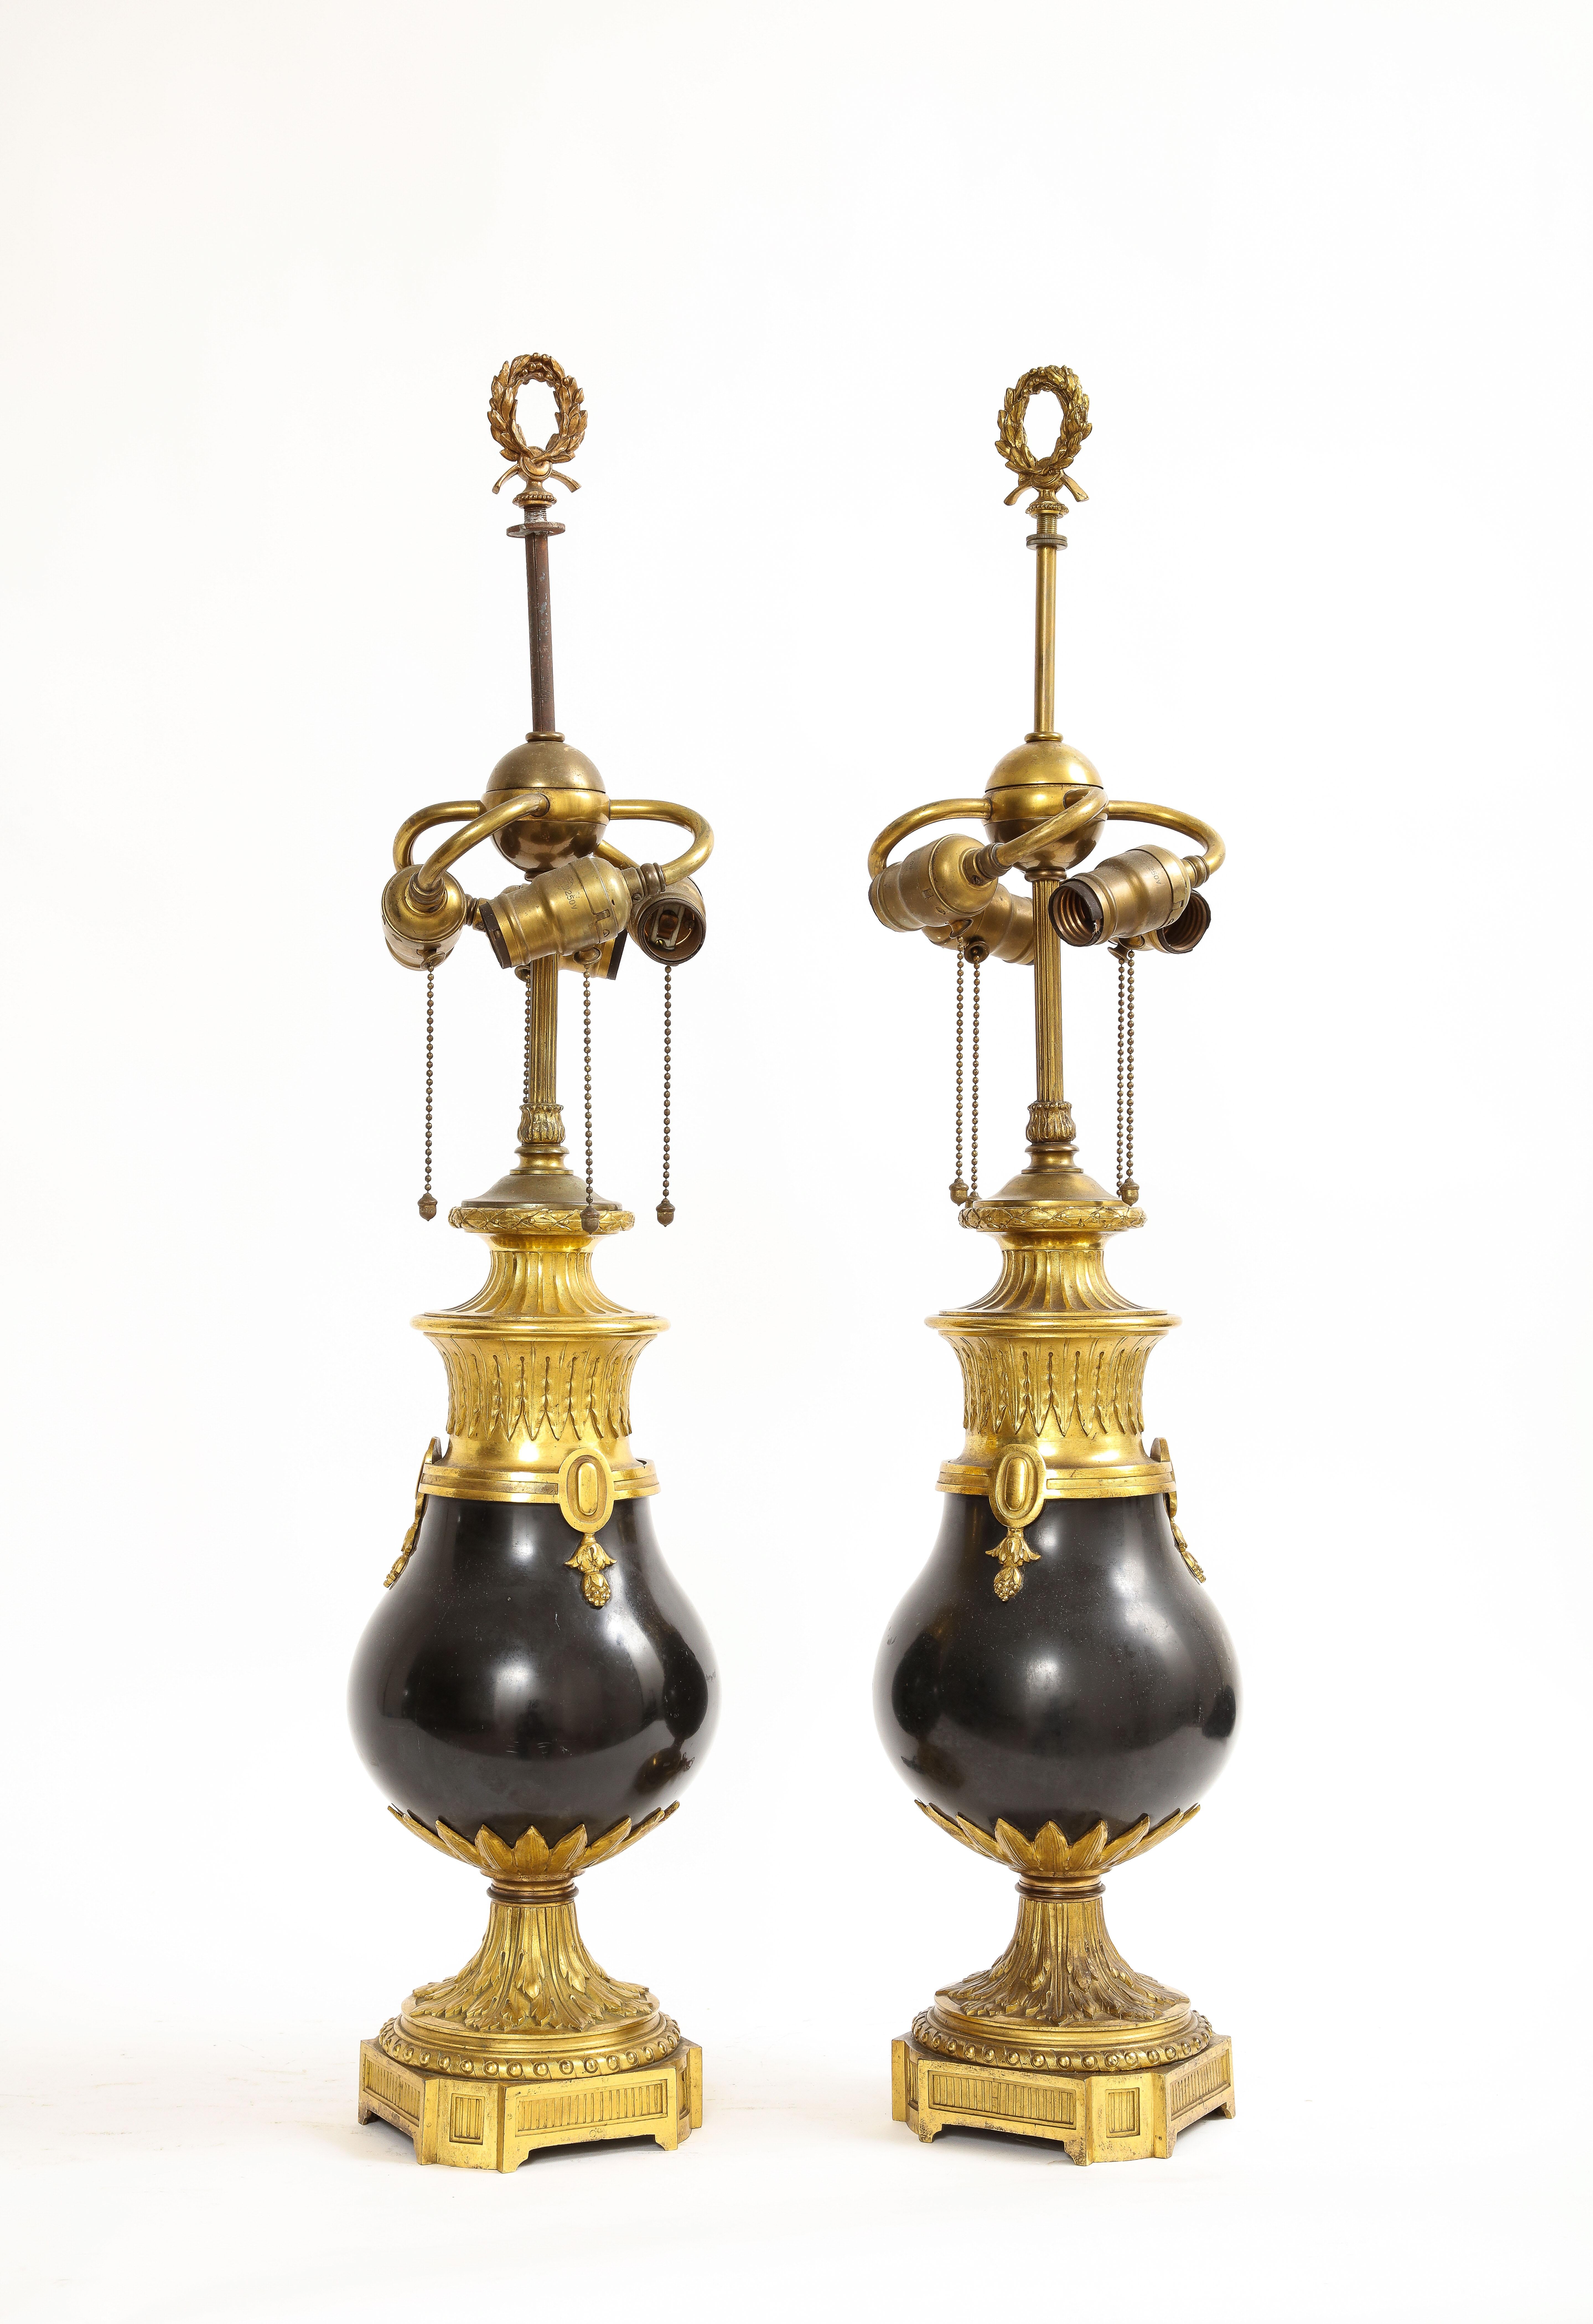 Polished Black Marble Ormolu Mounted Caldwell Lamps, 1800s For Sale